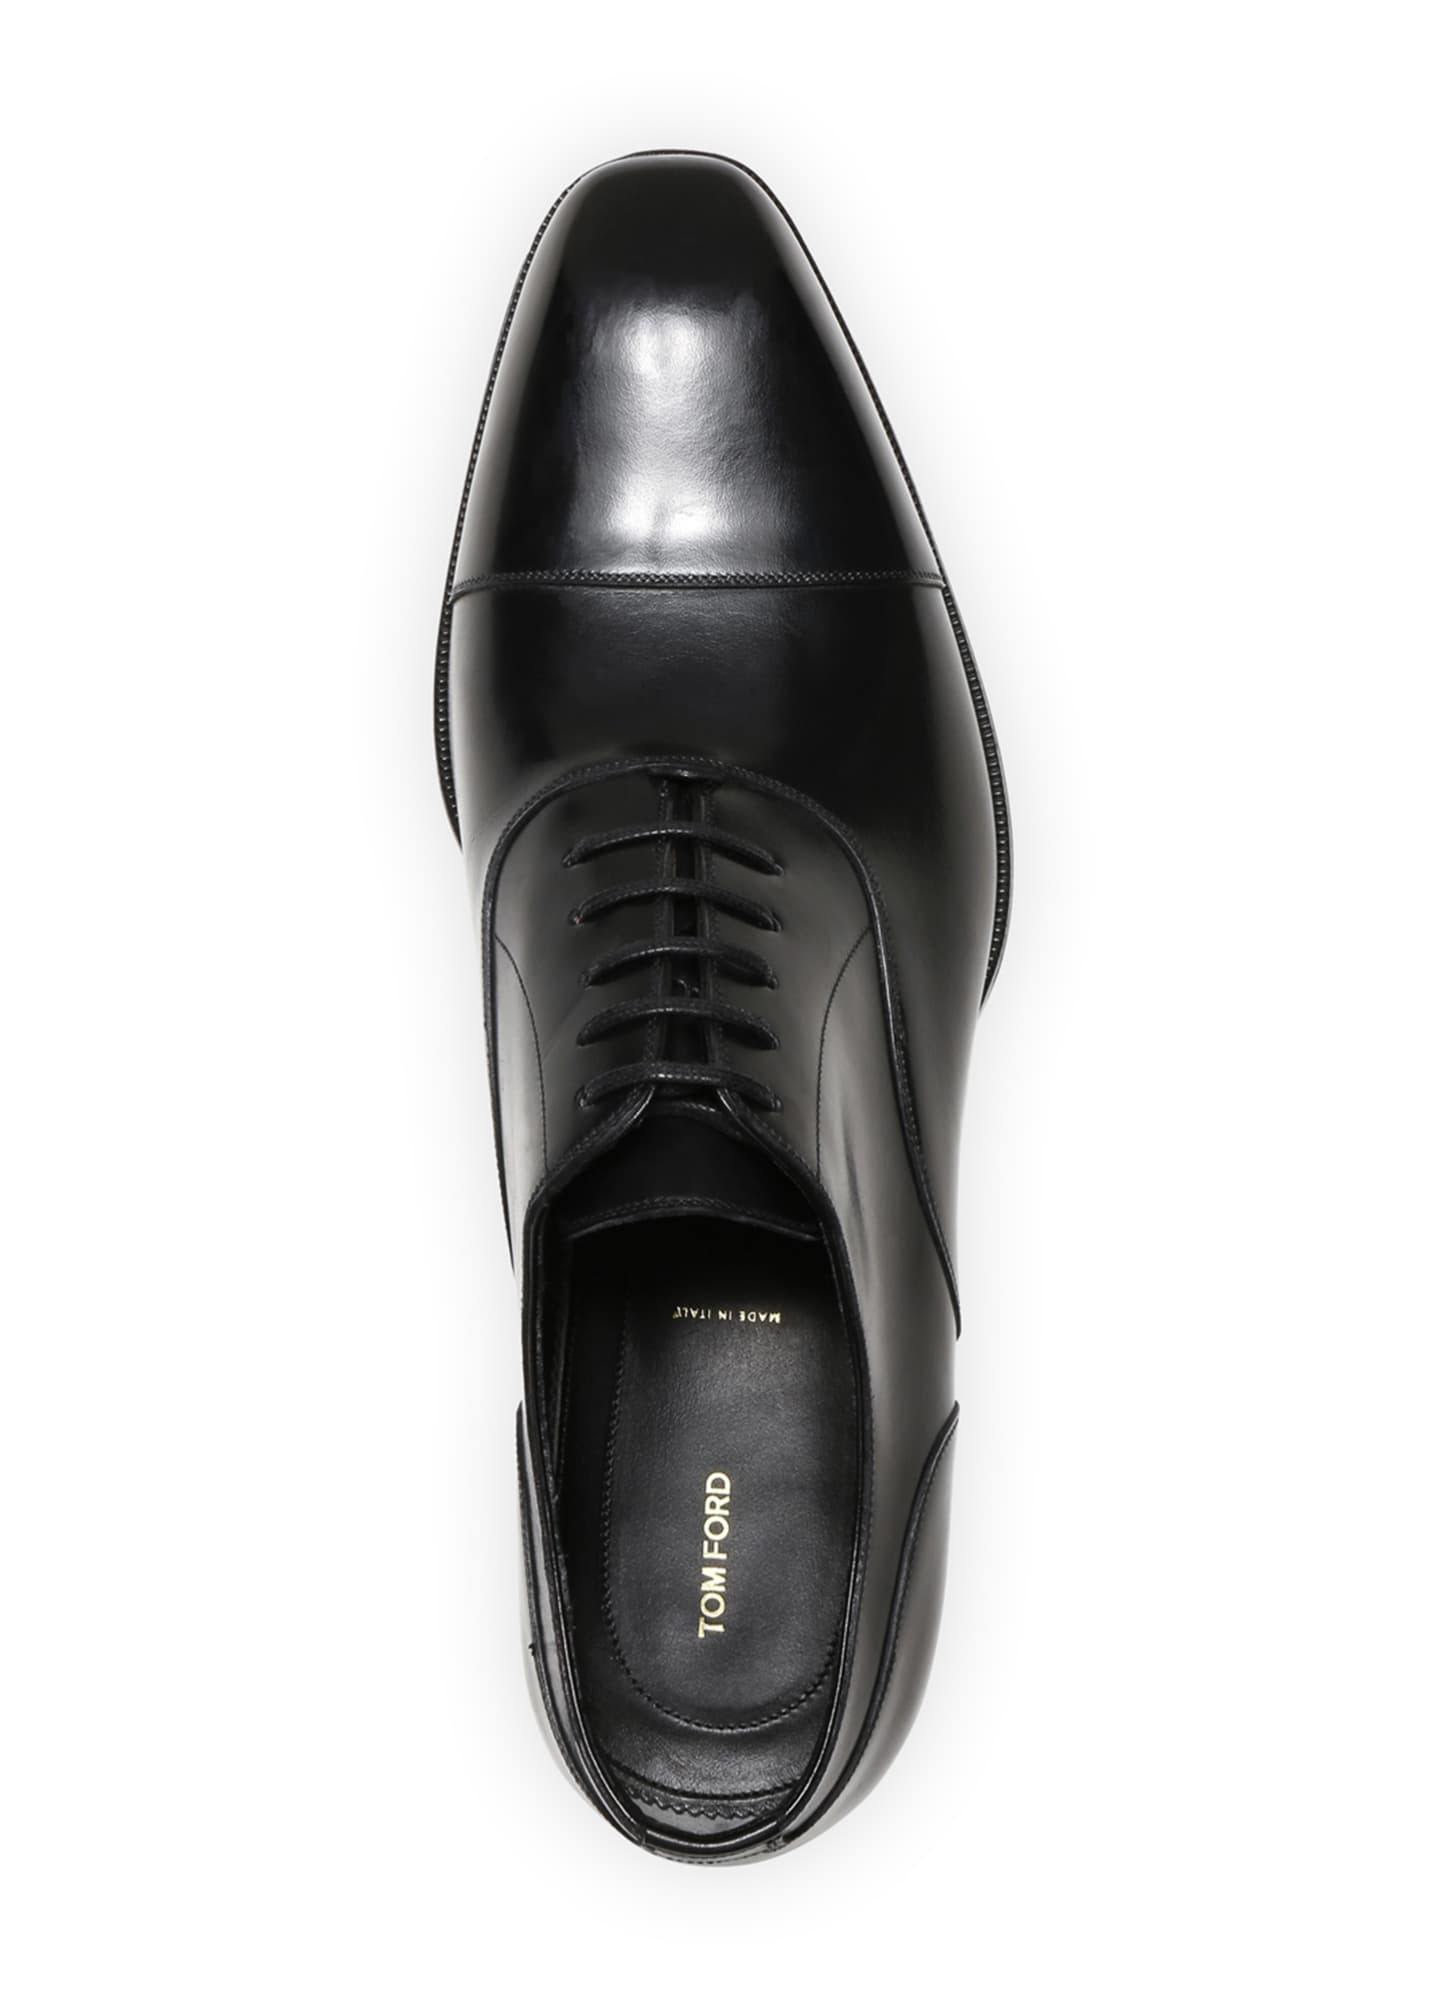 TOM FORD Men's Formal Leather Cap-Toe Oxford Shoes - Bergdorf Goodman